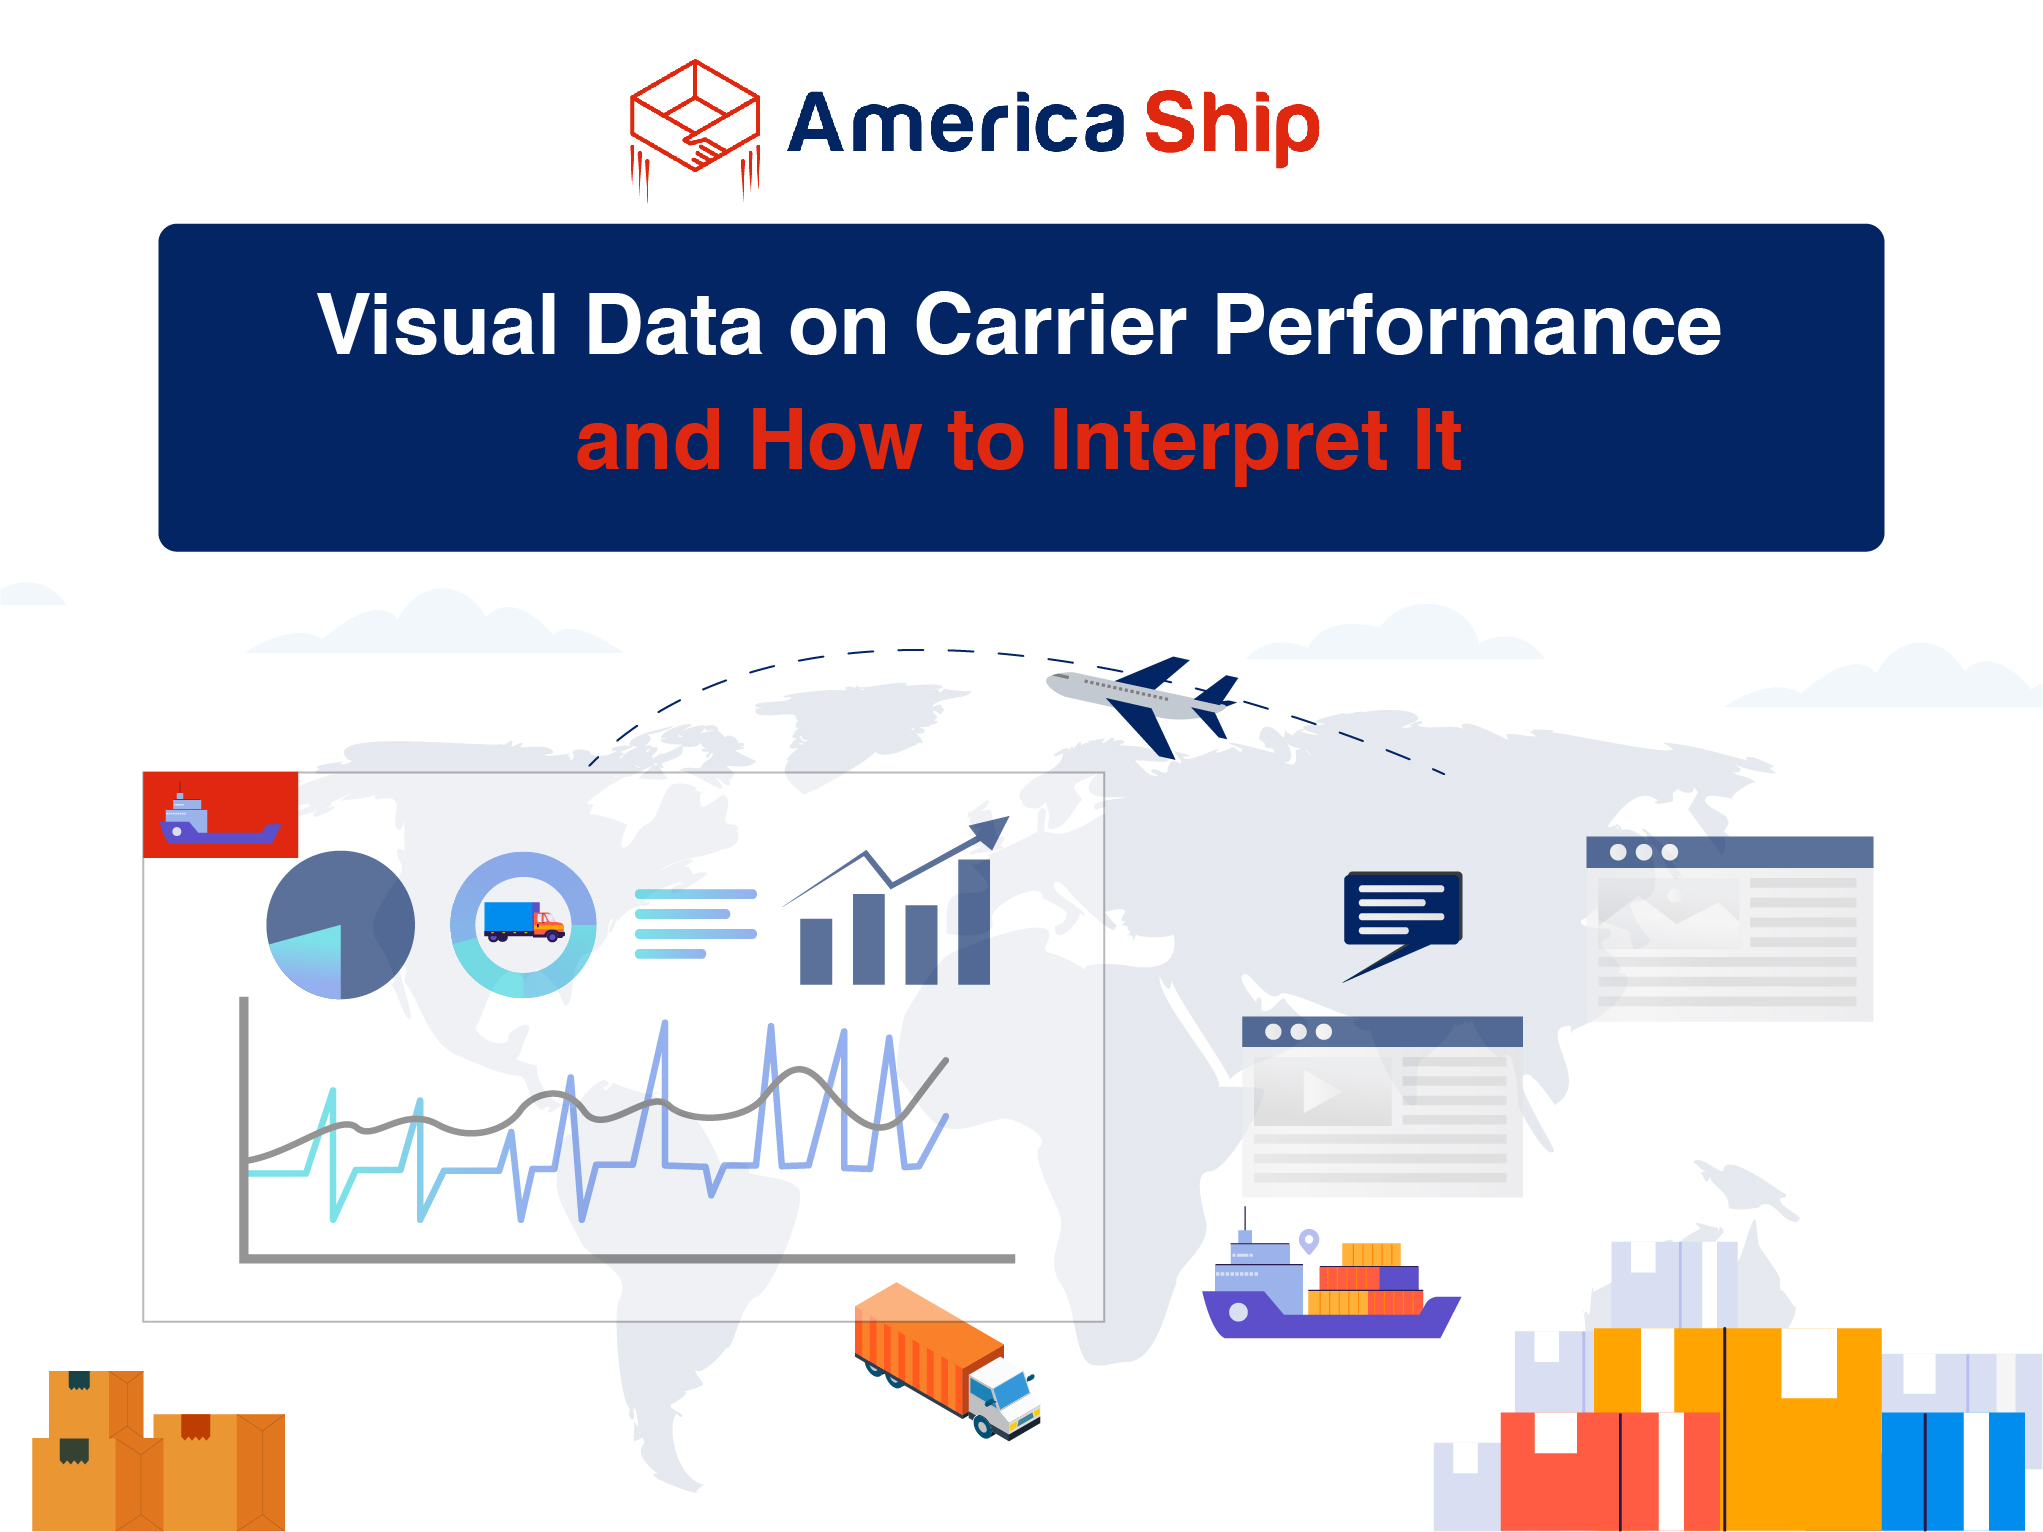 Visual Data on Carrier Performance and How to Interpret It